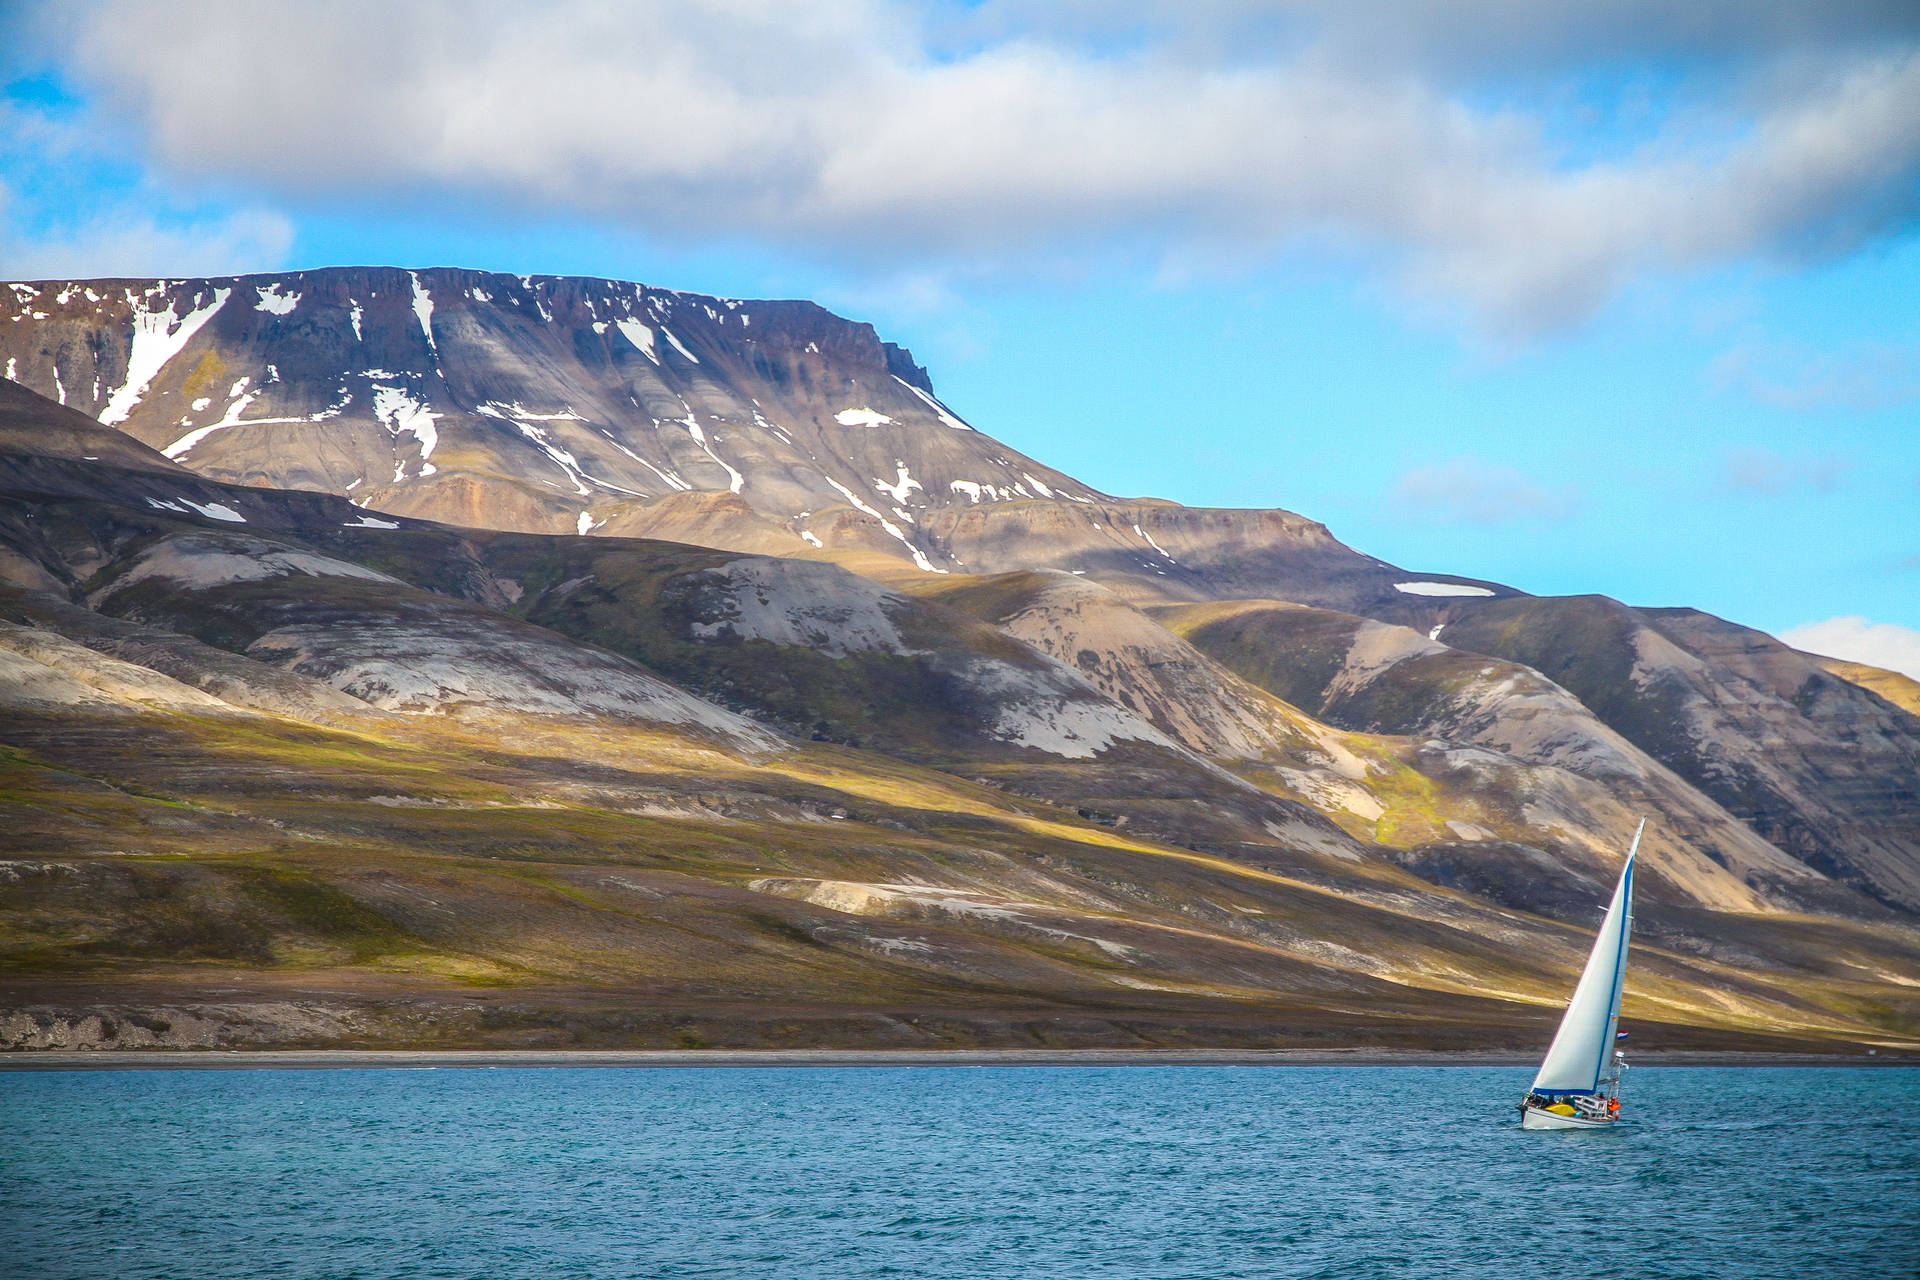 Sailing Boat Against Snow-capped Mountain